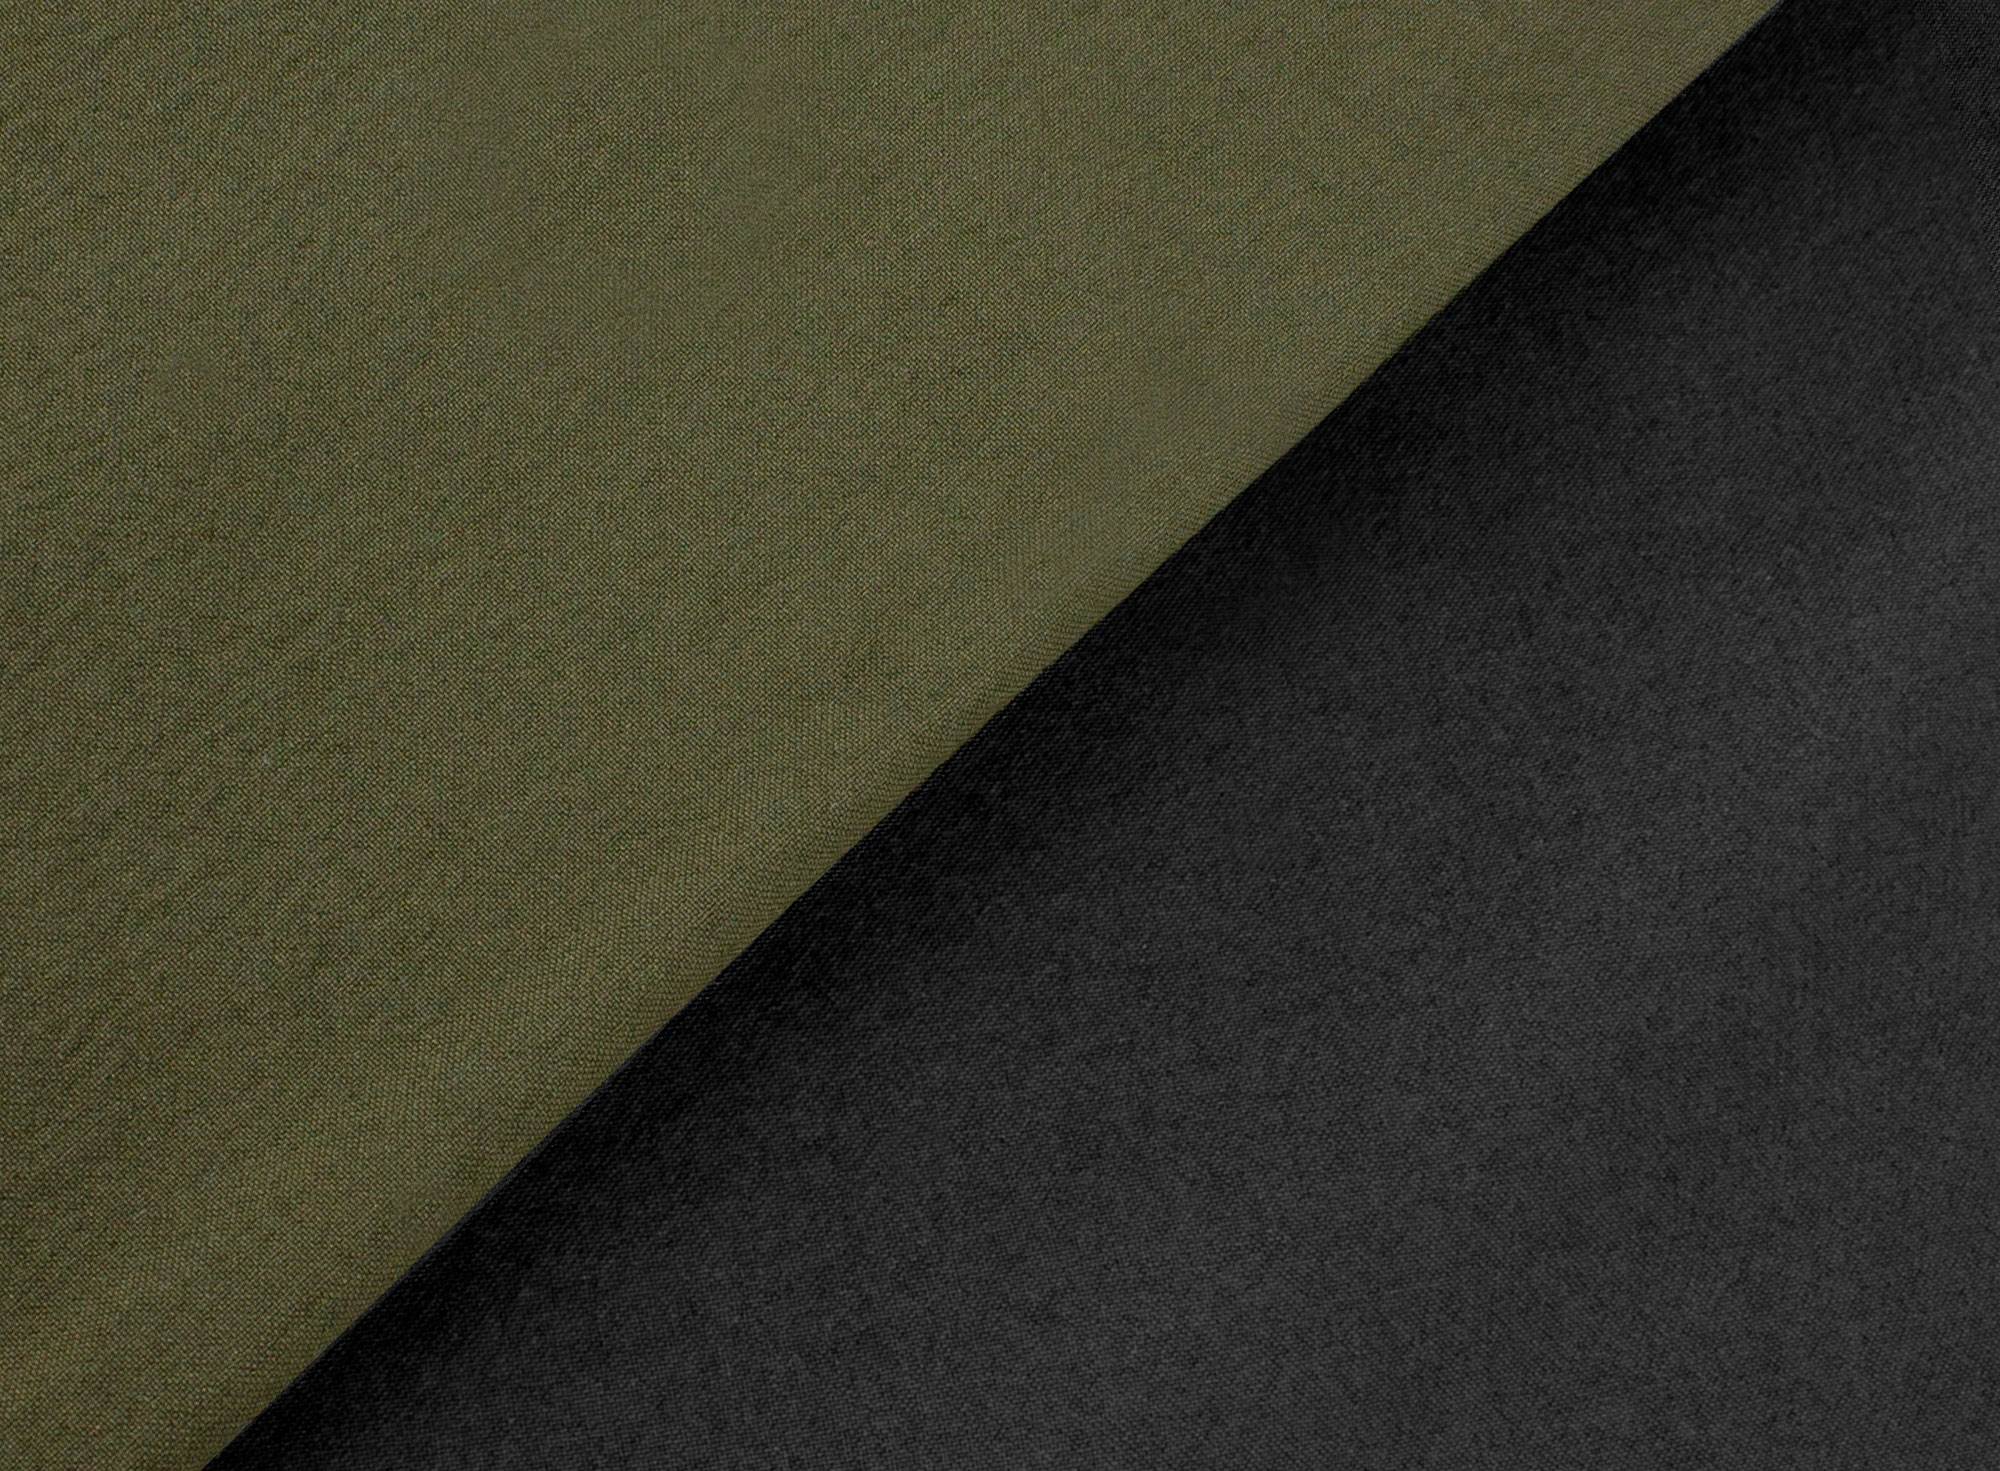 Stretch Woven Fabric | Industrial Fabric Supplier